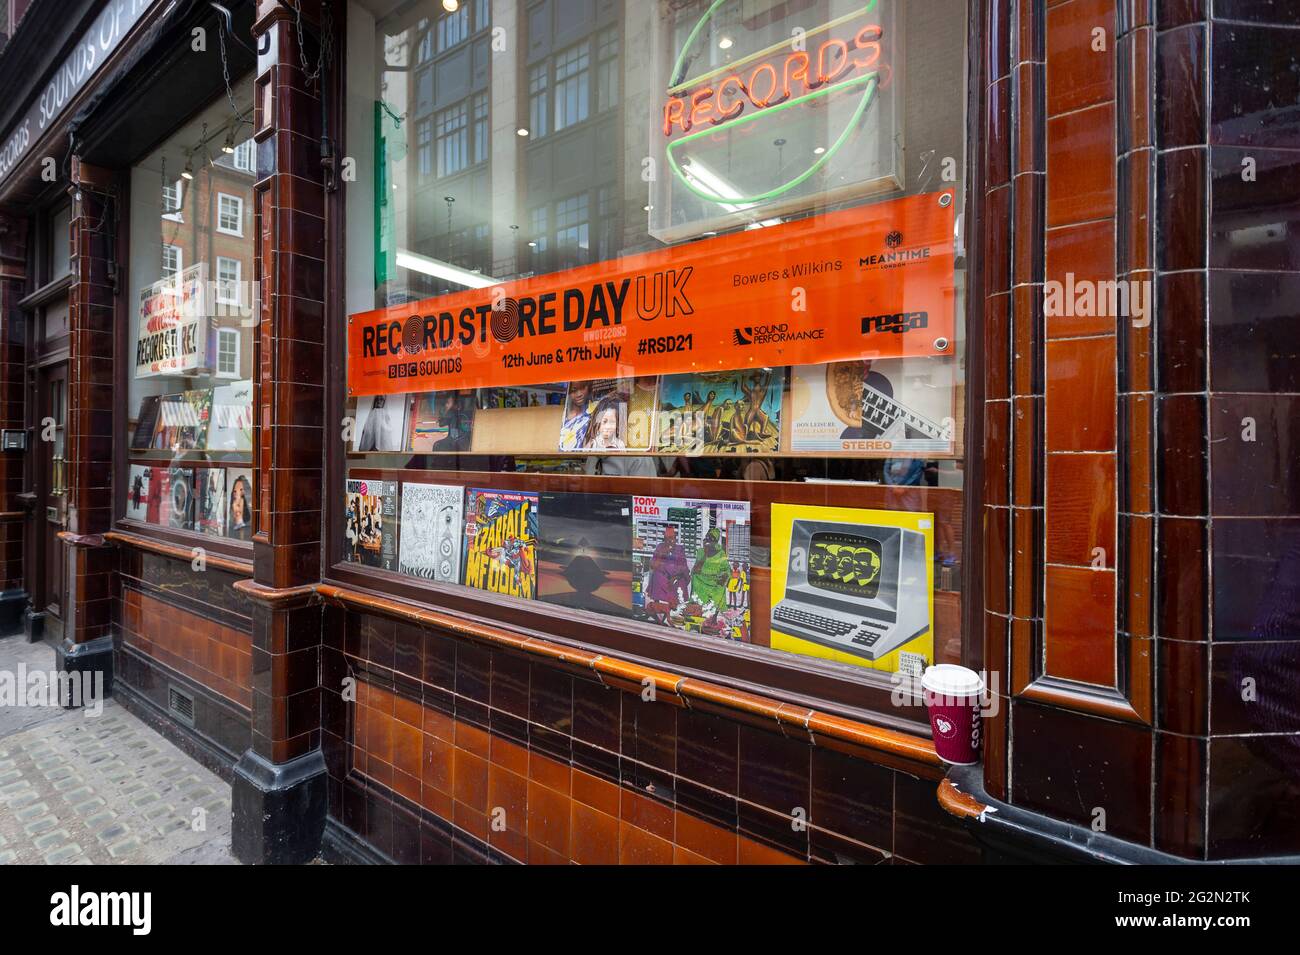 London Uk 12 June 21 Outside Sounds Of The Universe Records In Soho On Record Store Day Where Independent Record Shops Worldwide Celebrate Music Including Special Vinyl Releases Made Exclusively For The